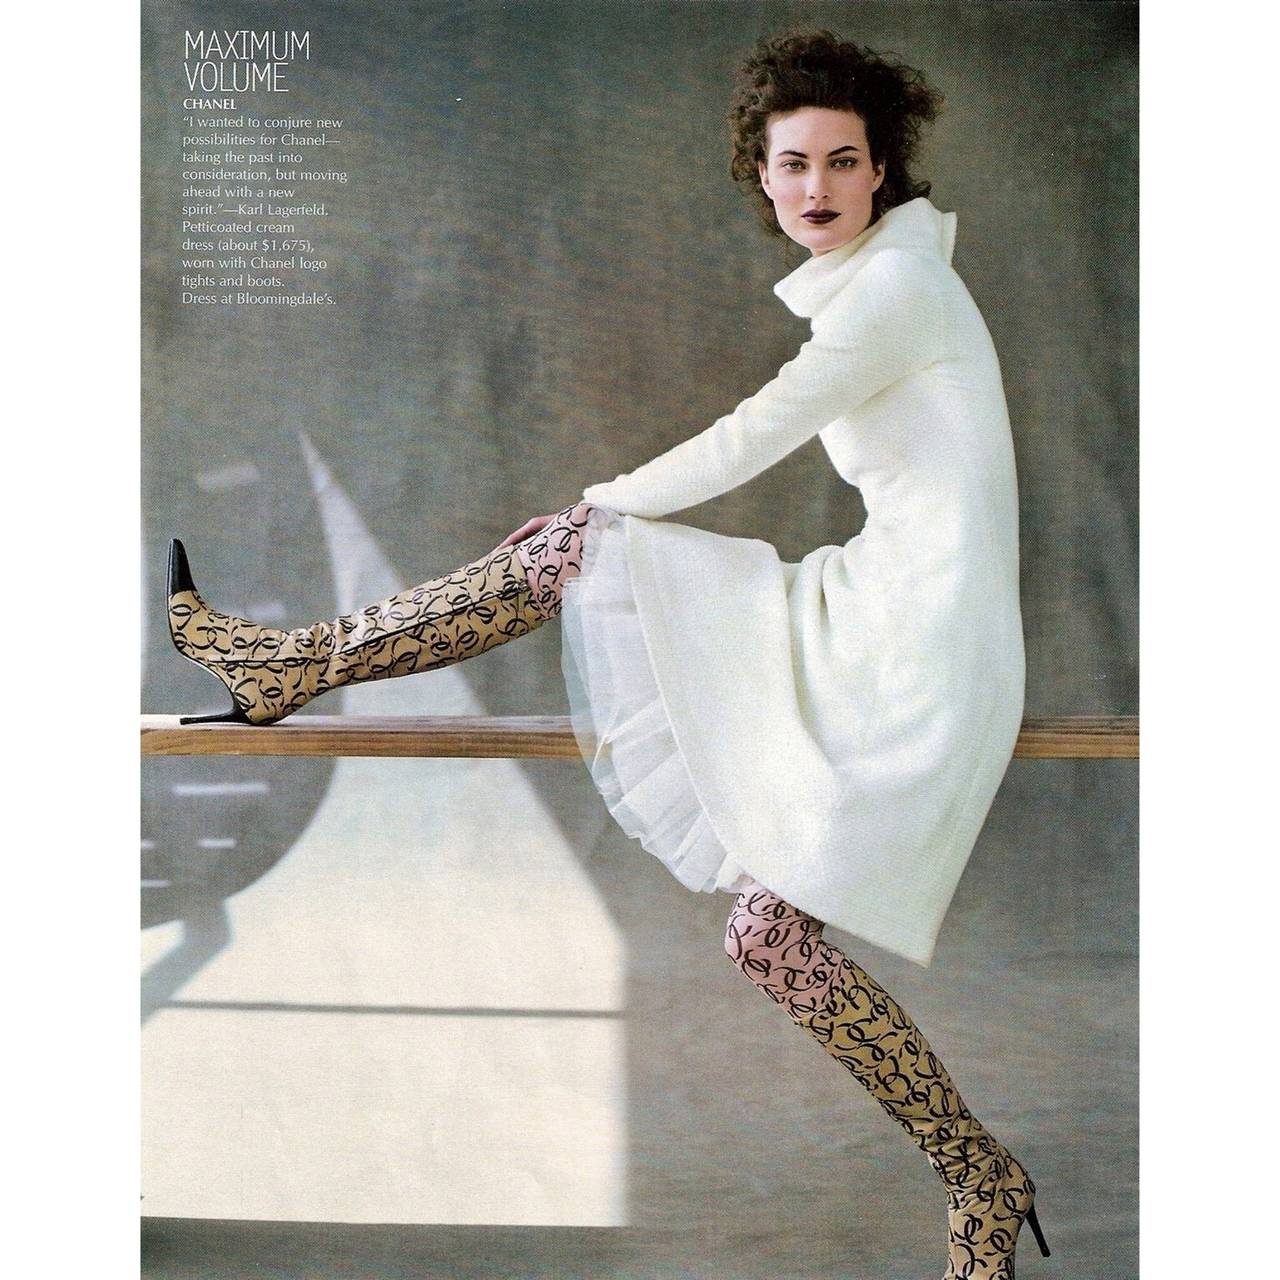 These iconic Chanel tights are a must for any collector. As seen on Shalom Harlow in Vogue magazine 2000. Chanel Beige Black Patterned  Fancy Tights.
Signature waistband, cotton gusset, and reinforced toe. 
New in package
CC Patterned.Size: